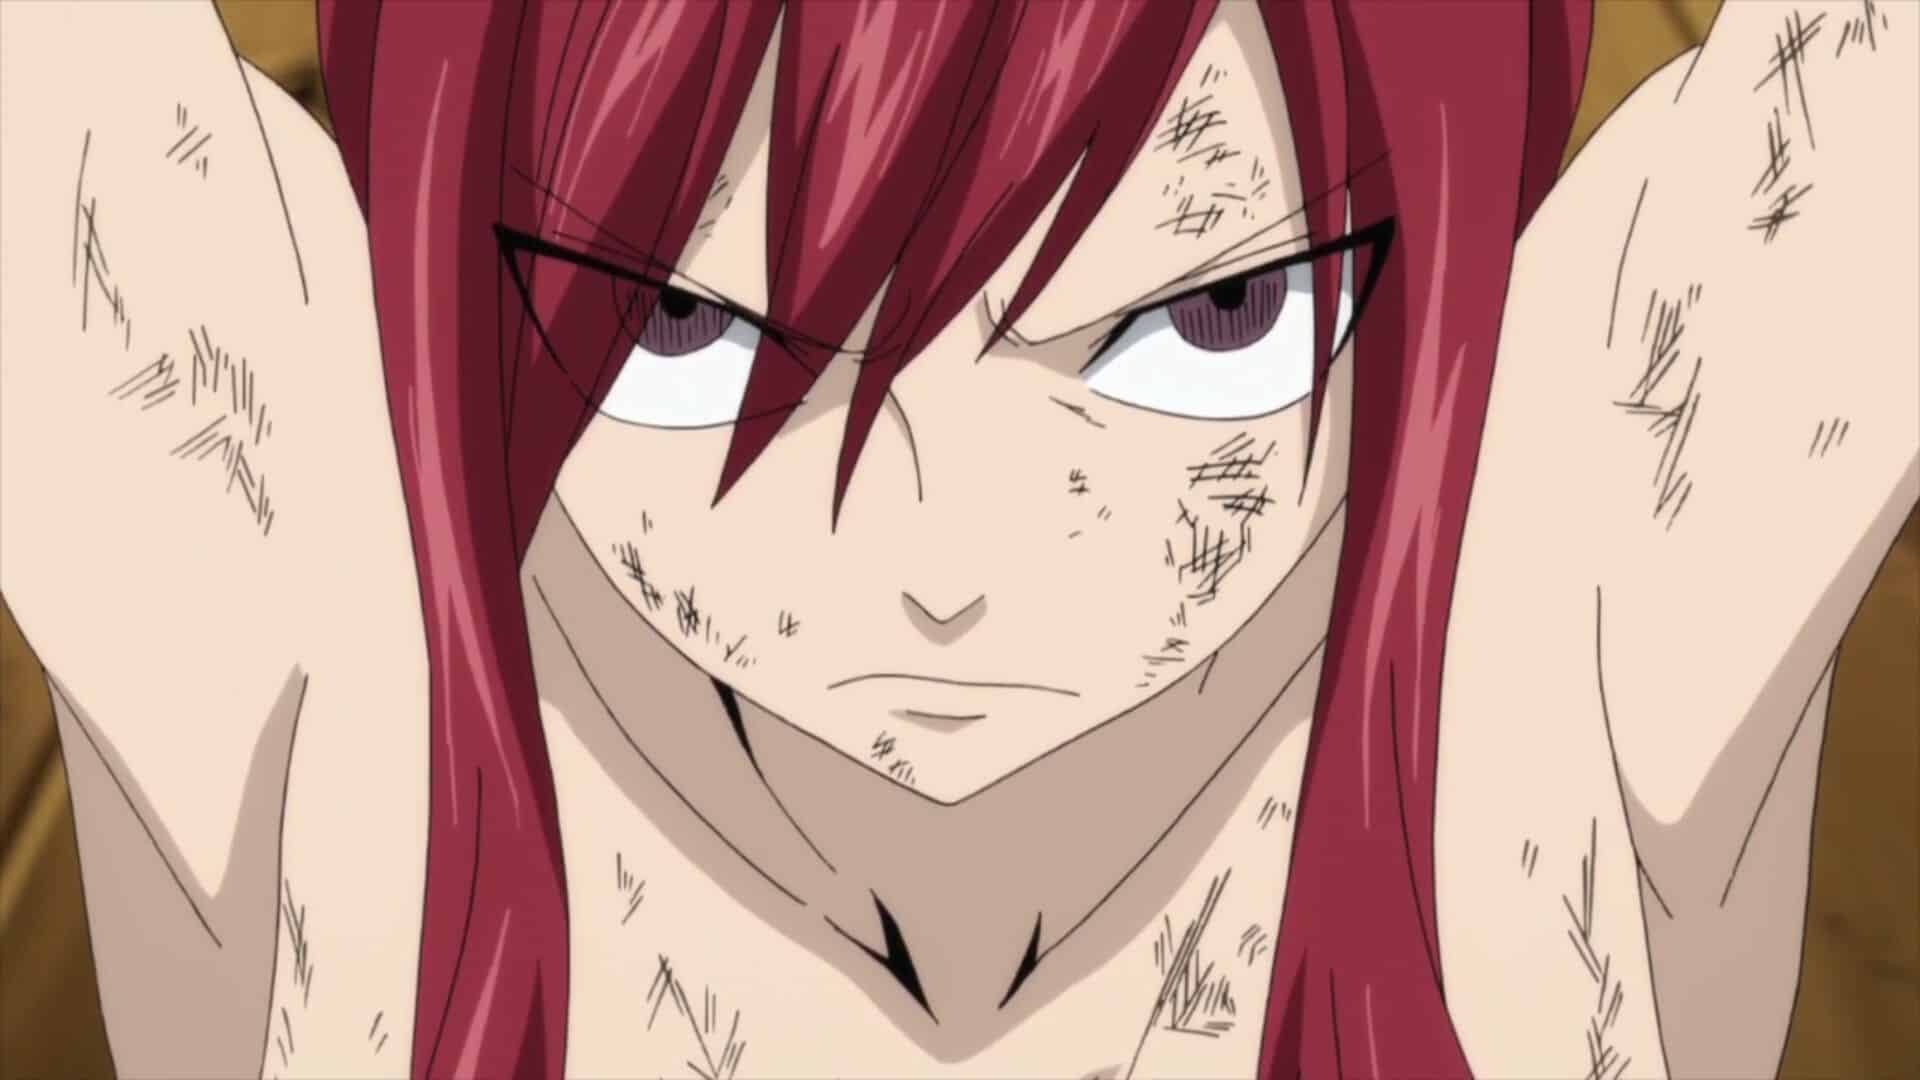 Top 10 Anime Girls With Red Hair List